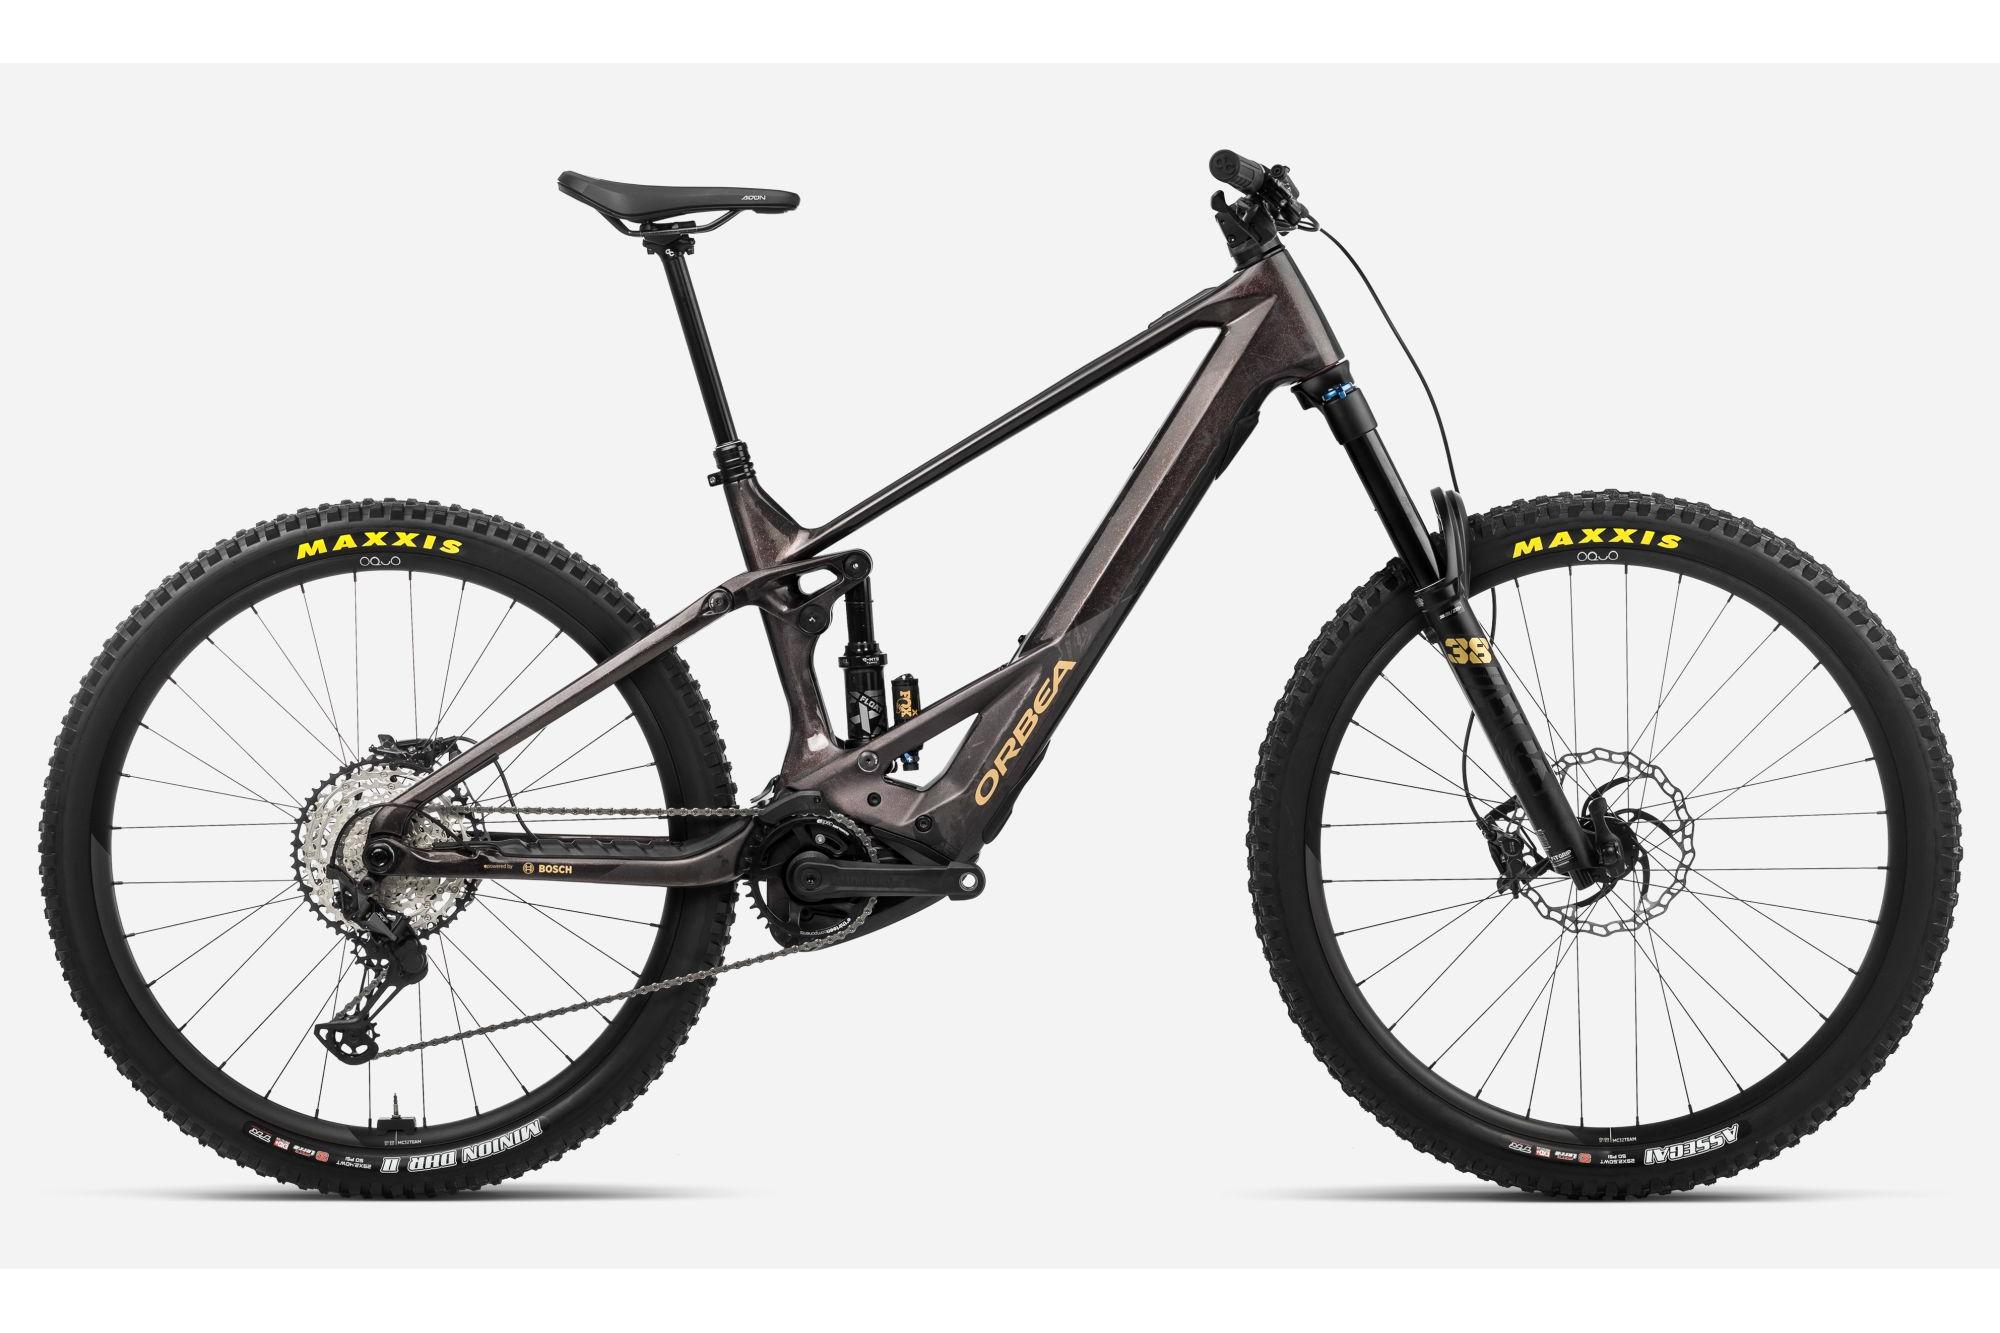 Orbea WILD M10 Review